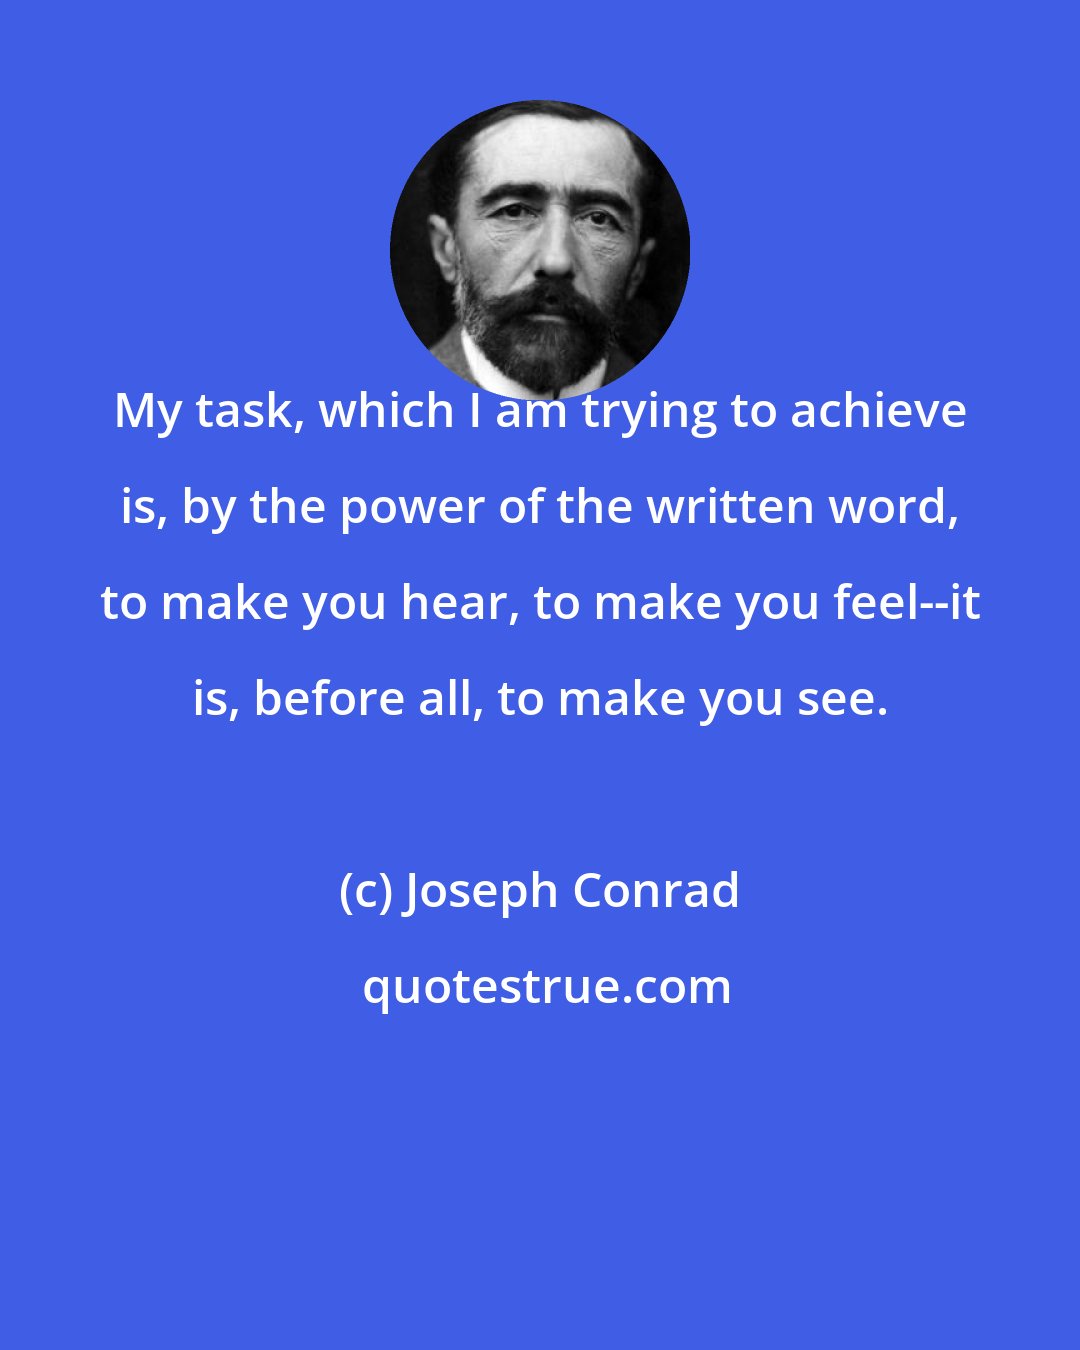 Joseph Conrad: My task, which I am trying to achieve is, by the power of the written word, to make you hear, to make you feel--it is, before all, to make you see.